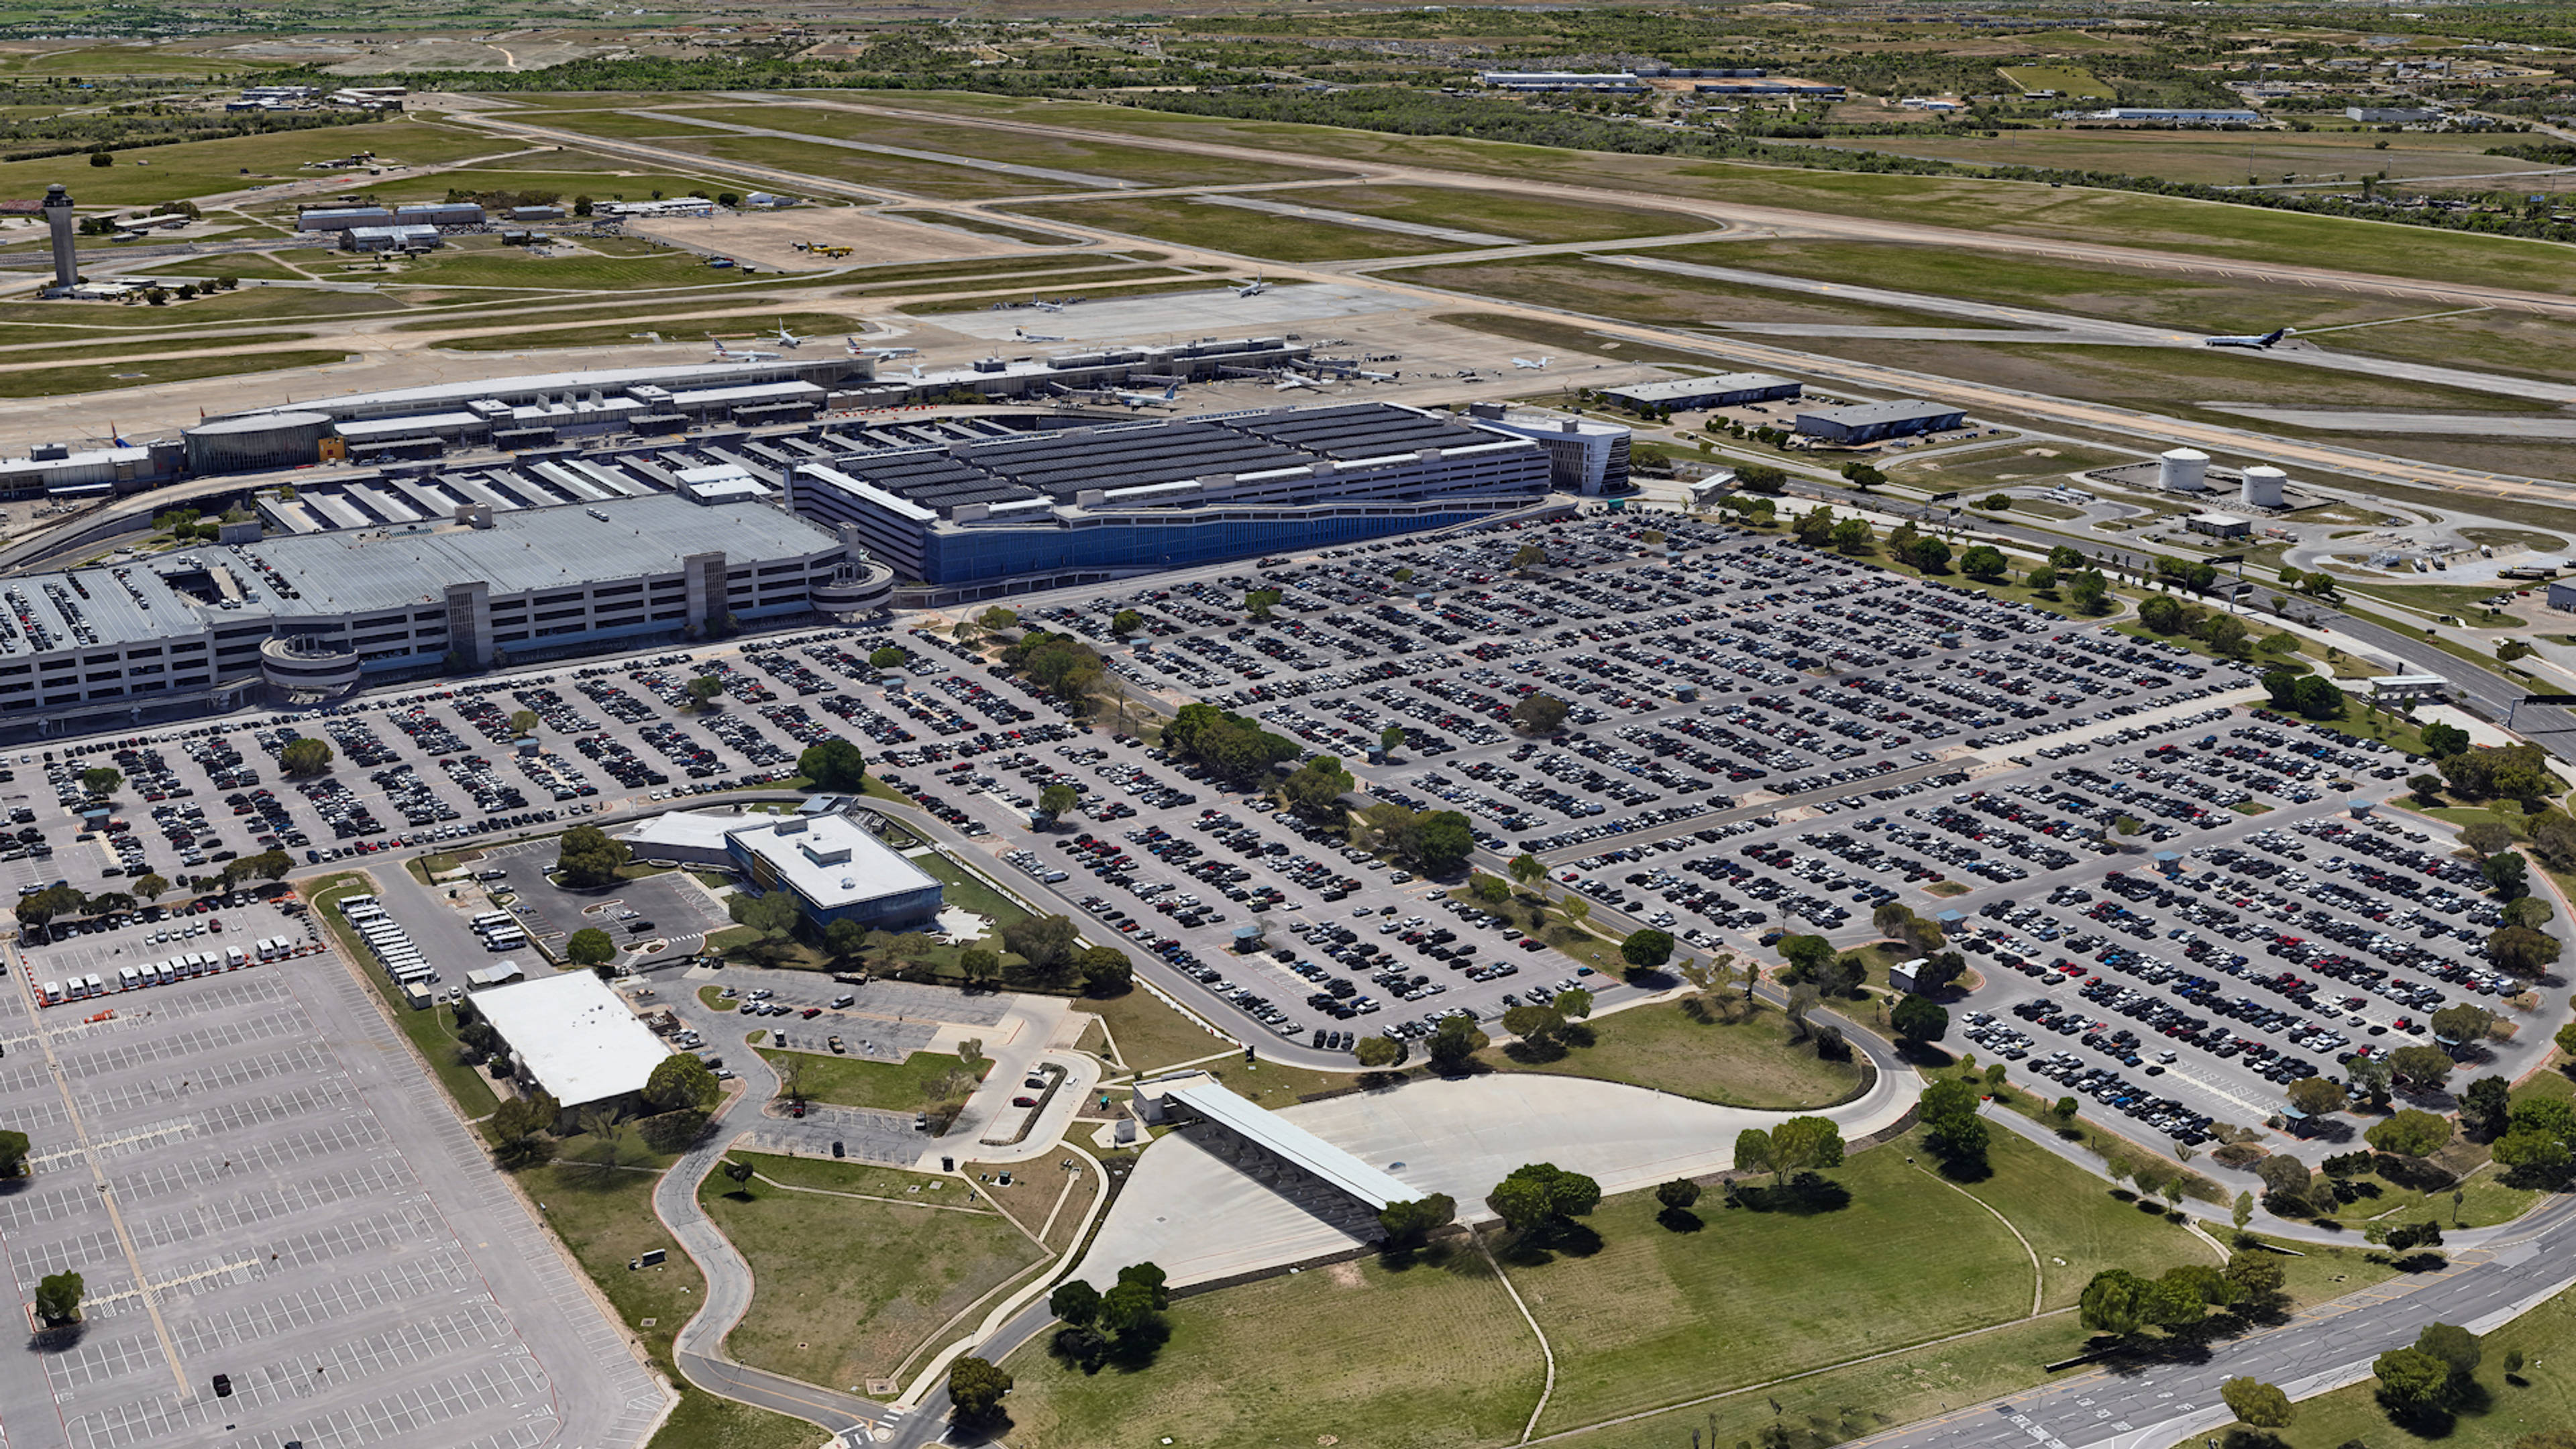  Aerial View of Austin Airport Parking